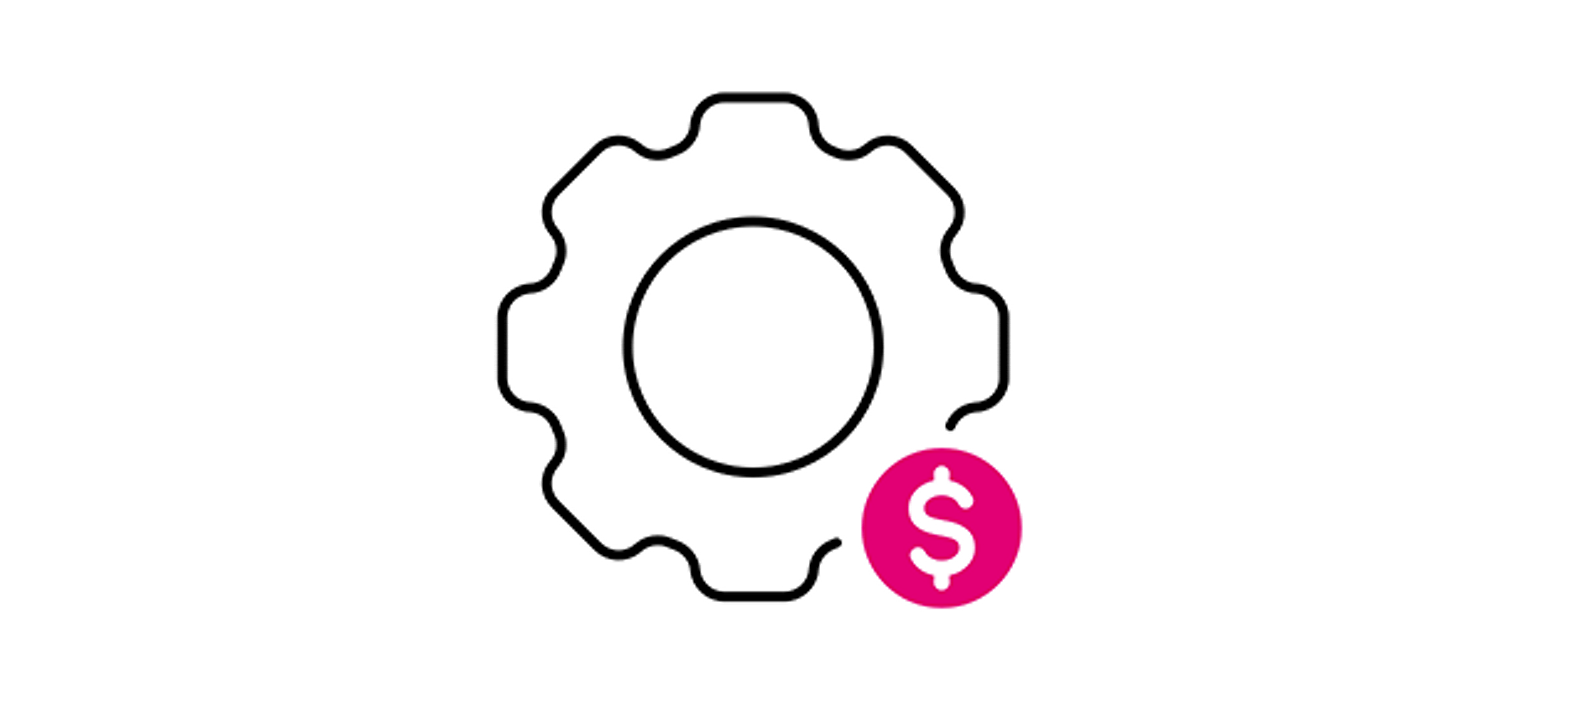 Icon of a gear with a magenta dollar sign on the lower right side